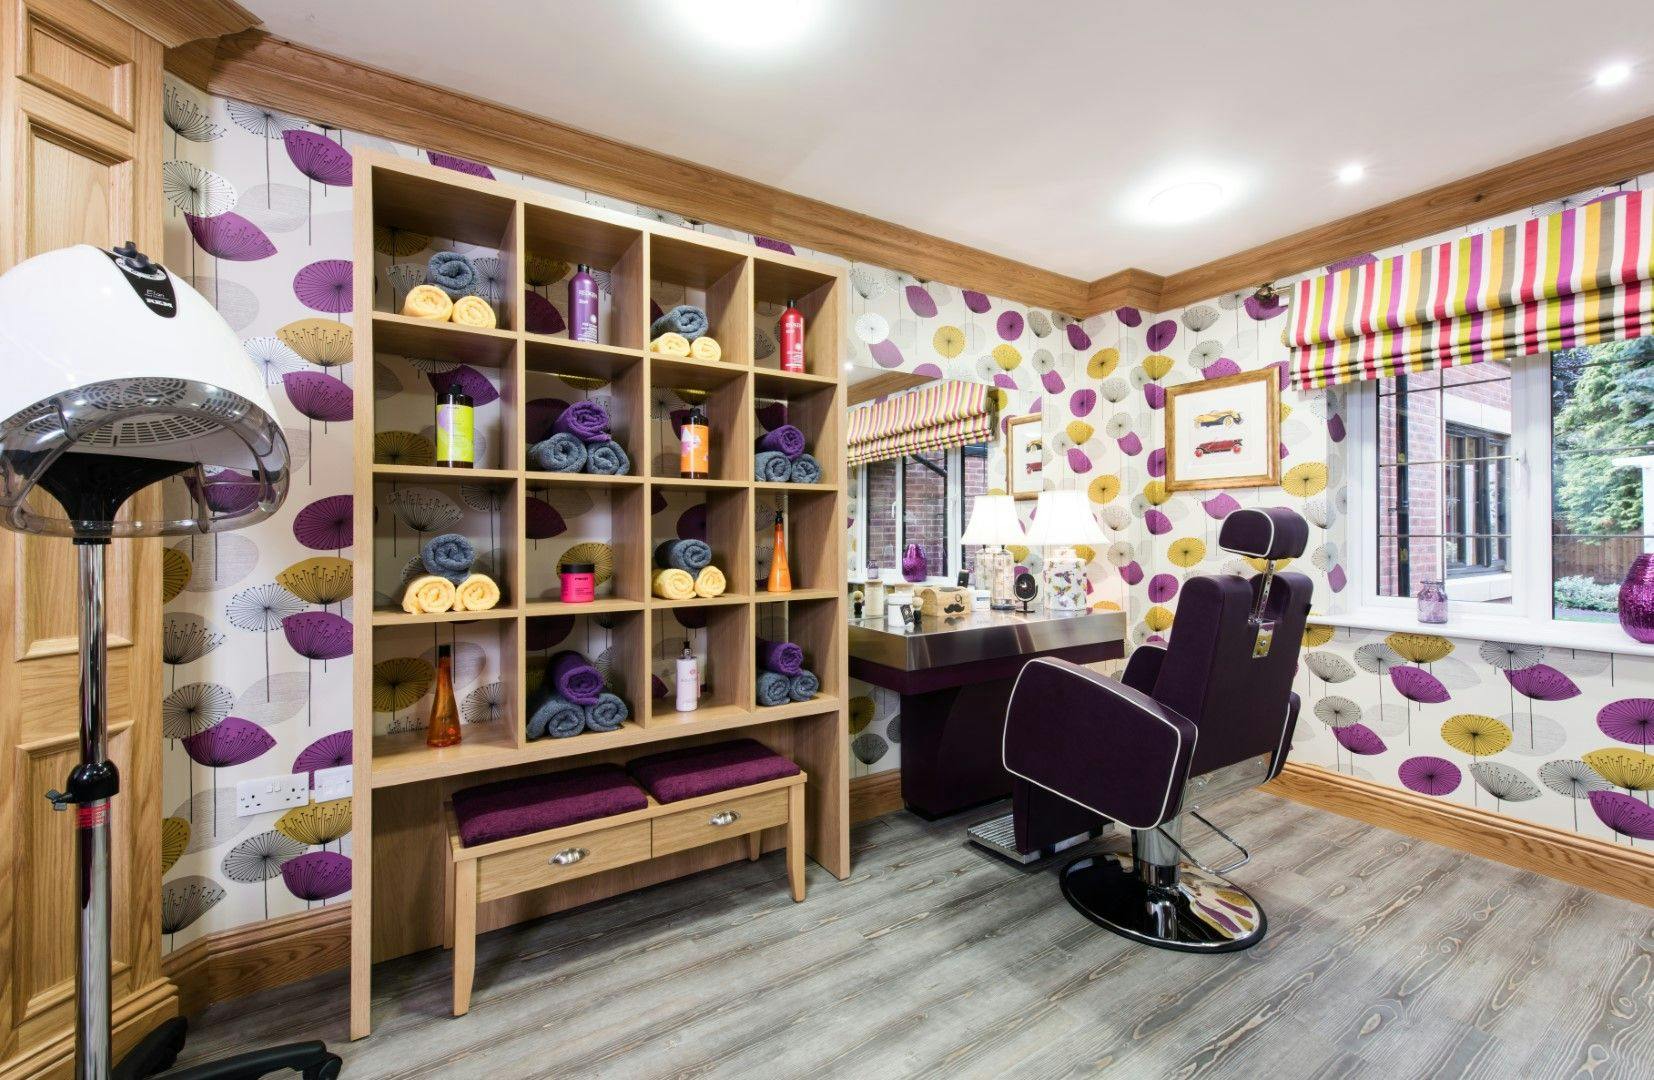 Salon at Anya court Care Home in Rugby, Warwickshire